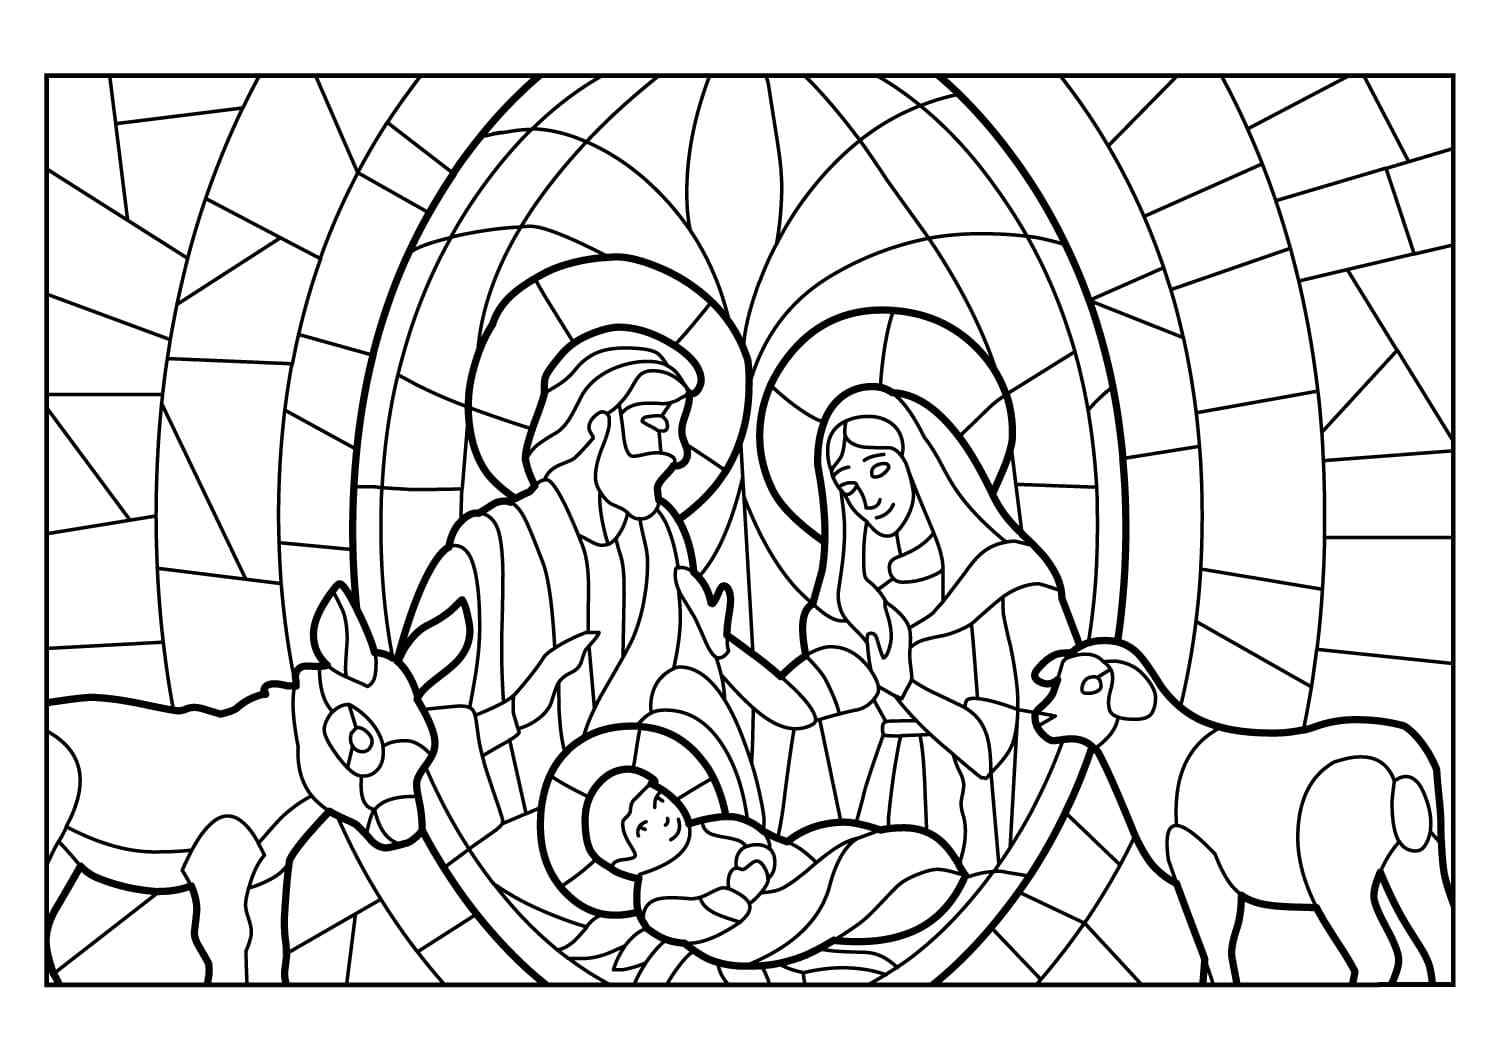 Stained Glass Window Of The Nativity Scene